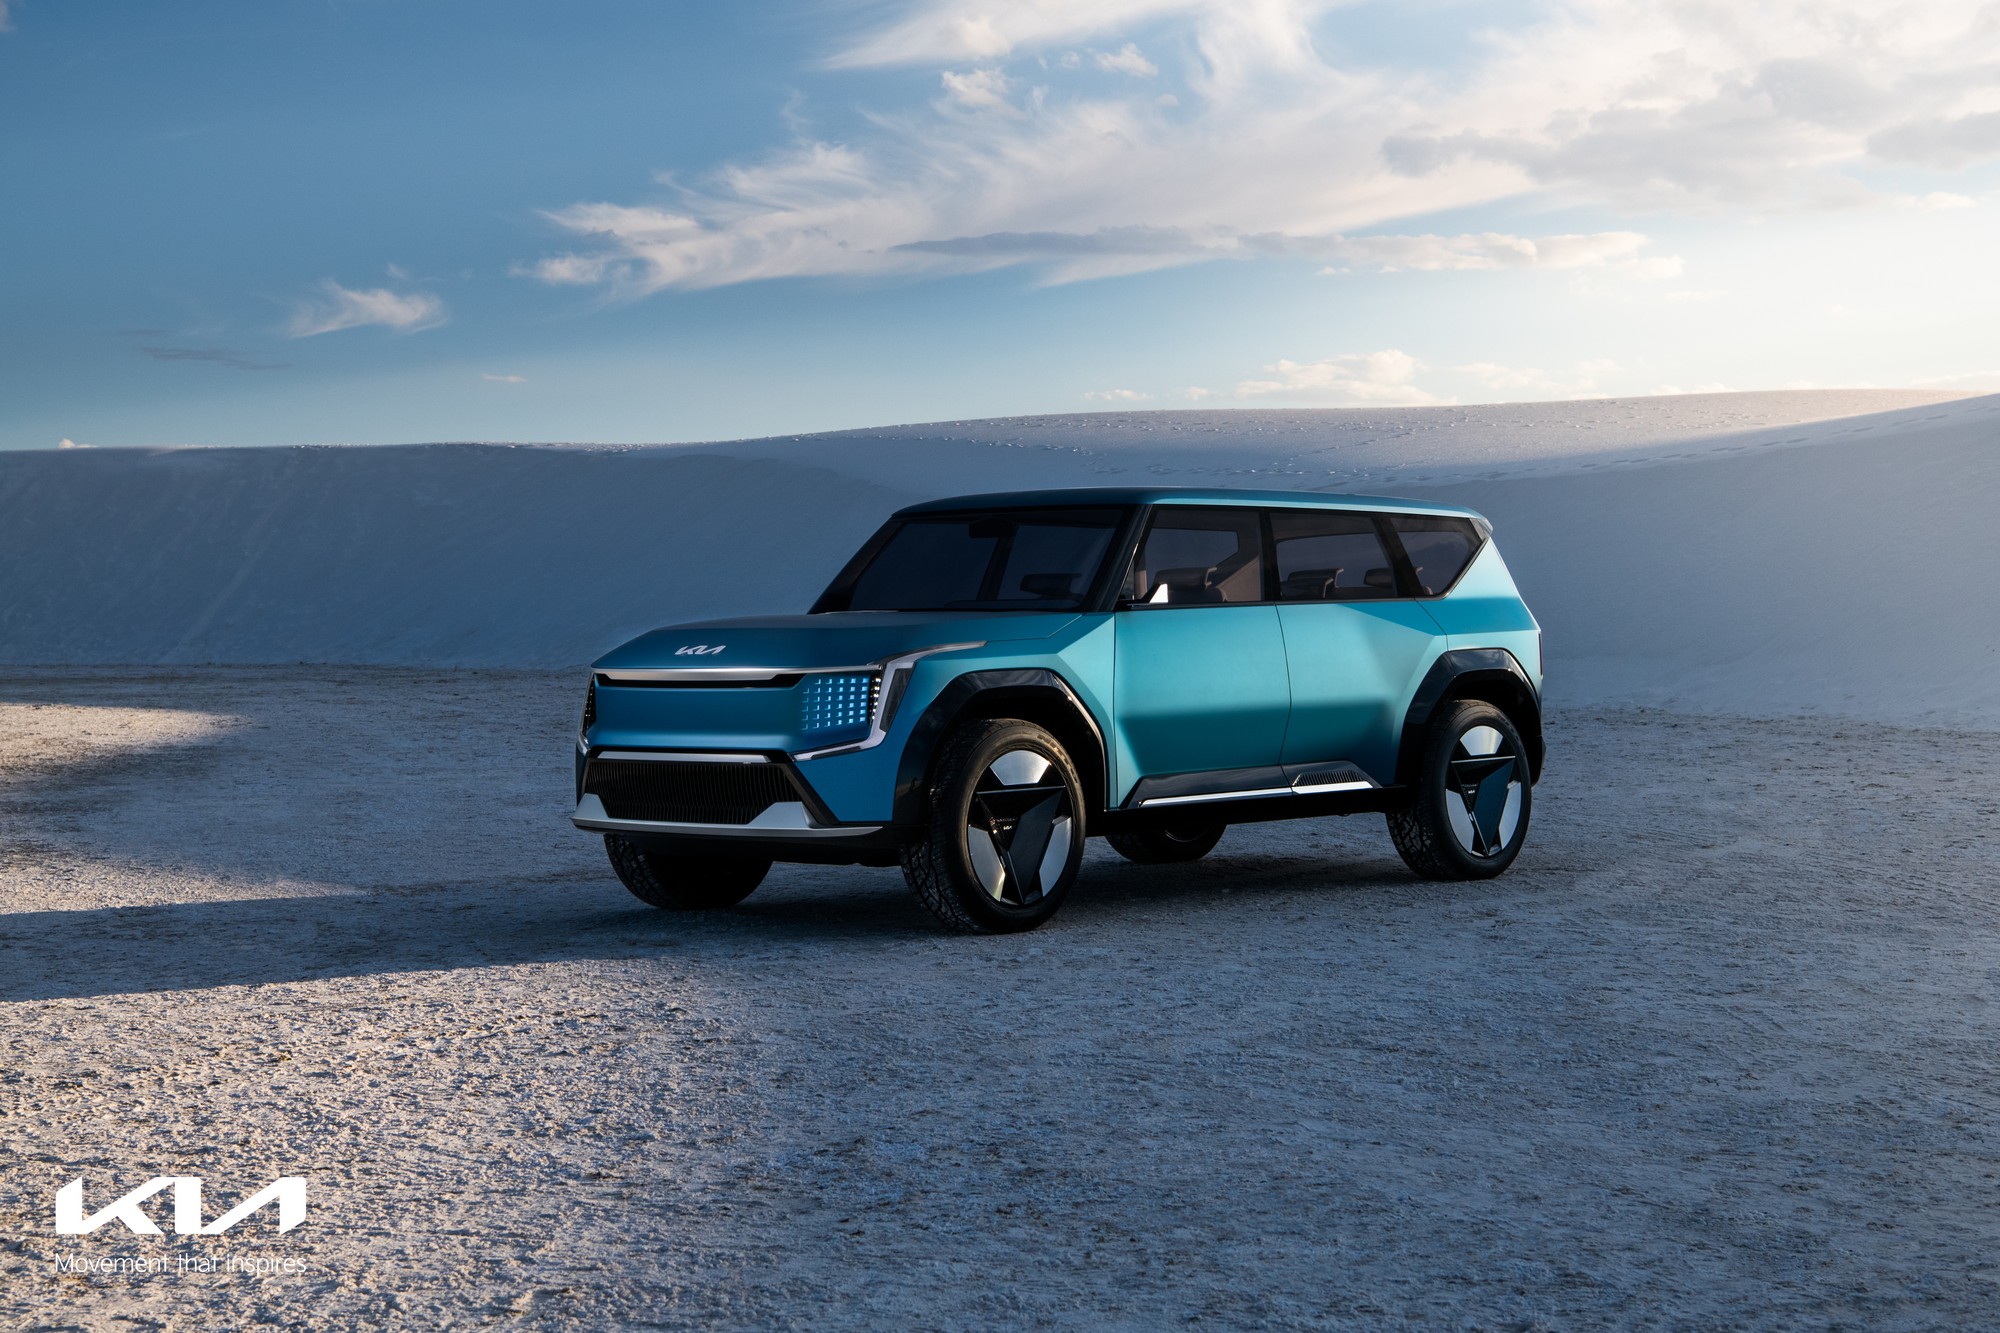 Rivian R1S and Tesla Model X competitor: Kia shows teaser of future EV9 electric SUV